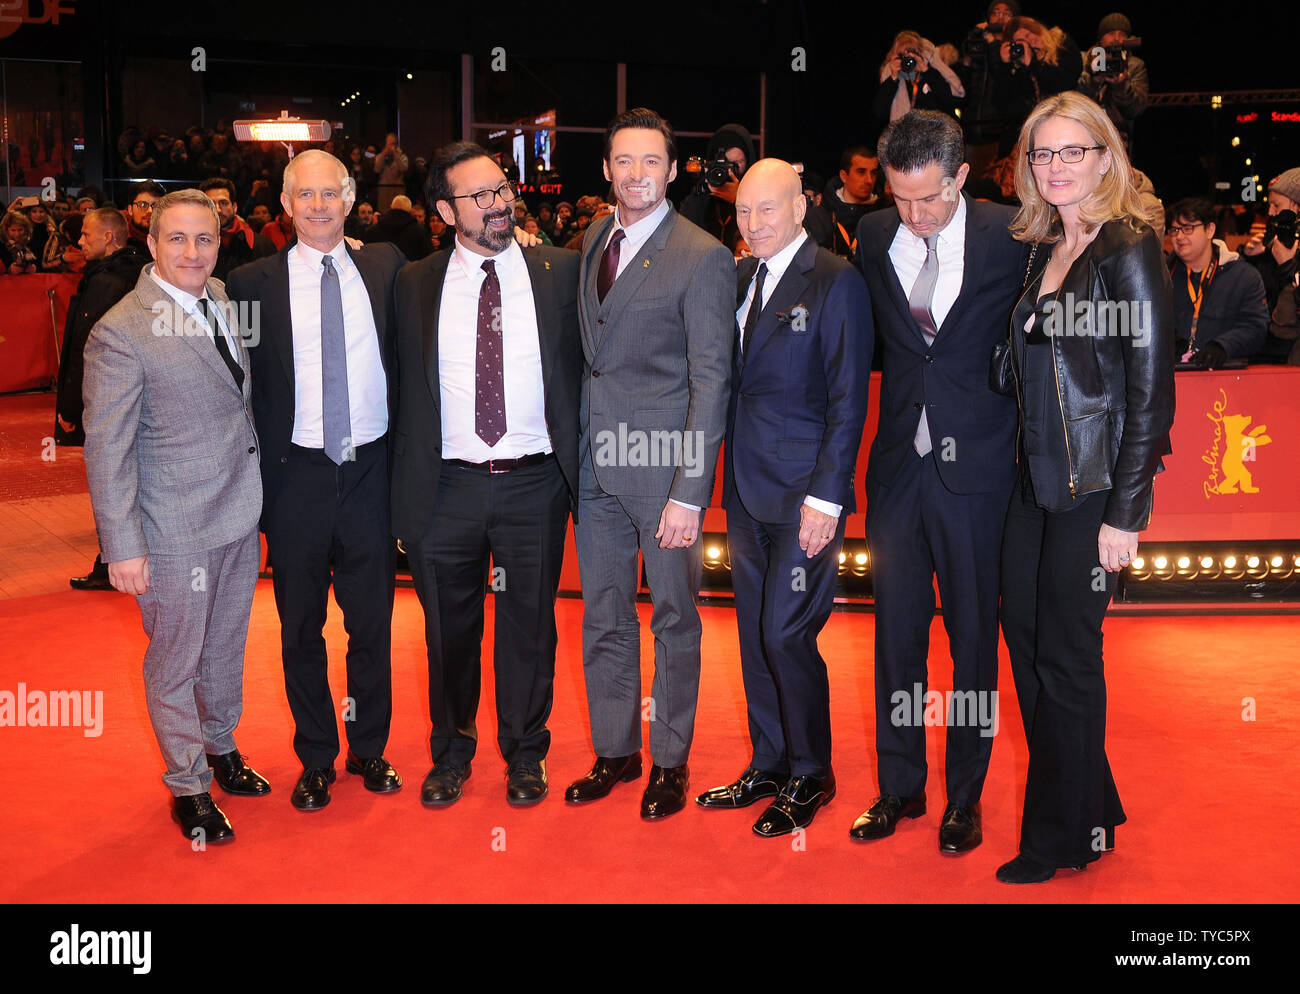 American producer Hutch Parker, American director James Mangold, Australian actor Hugh Jackman, British actress Dafne Keen, British actor Patrick Stewart and British producer Simon Kinberg attend the premiere for Logan at the Grand Hyatt Hotel in Berlin on February 17, 2017. Photo by Paul Treadway/ UPI Stock Photo